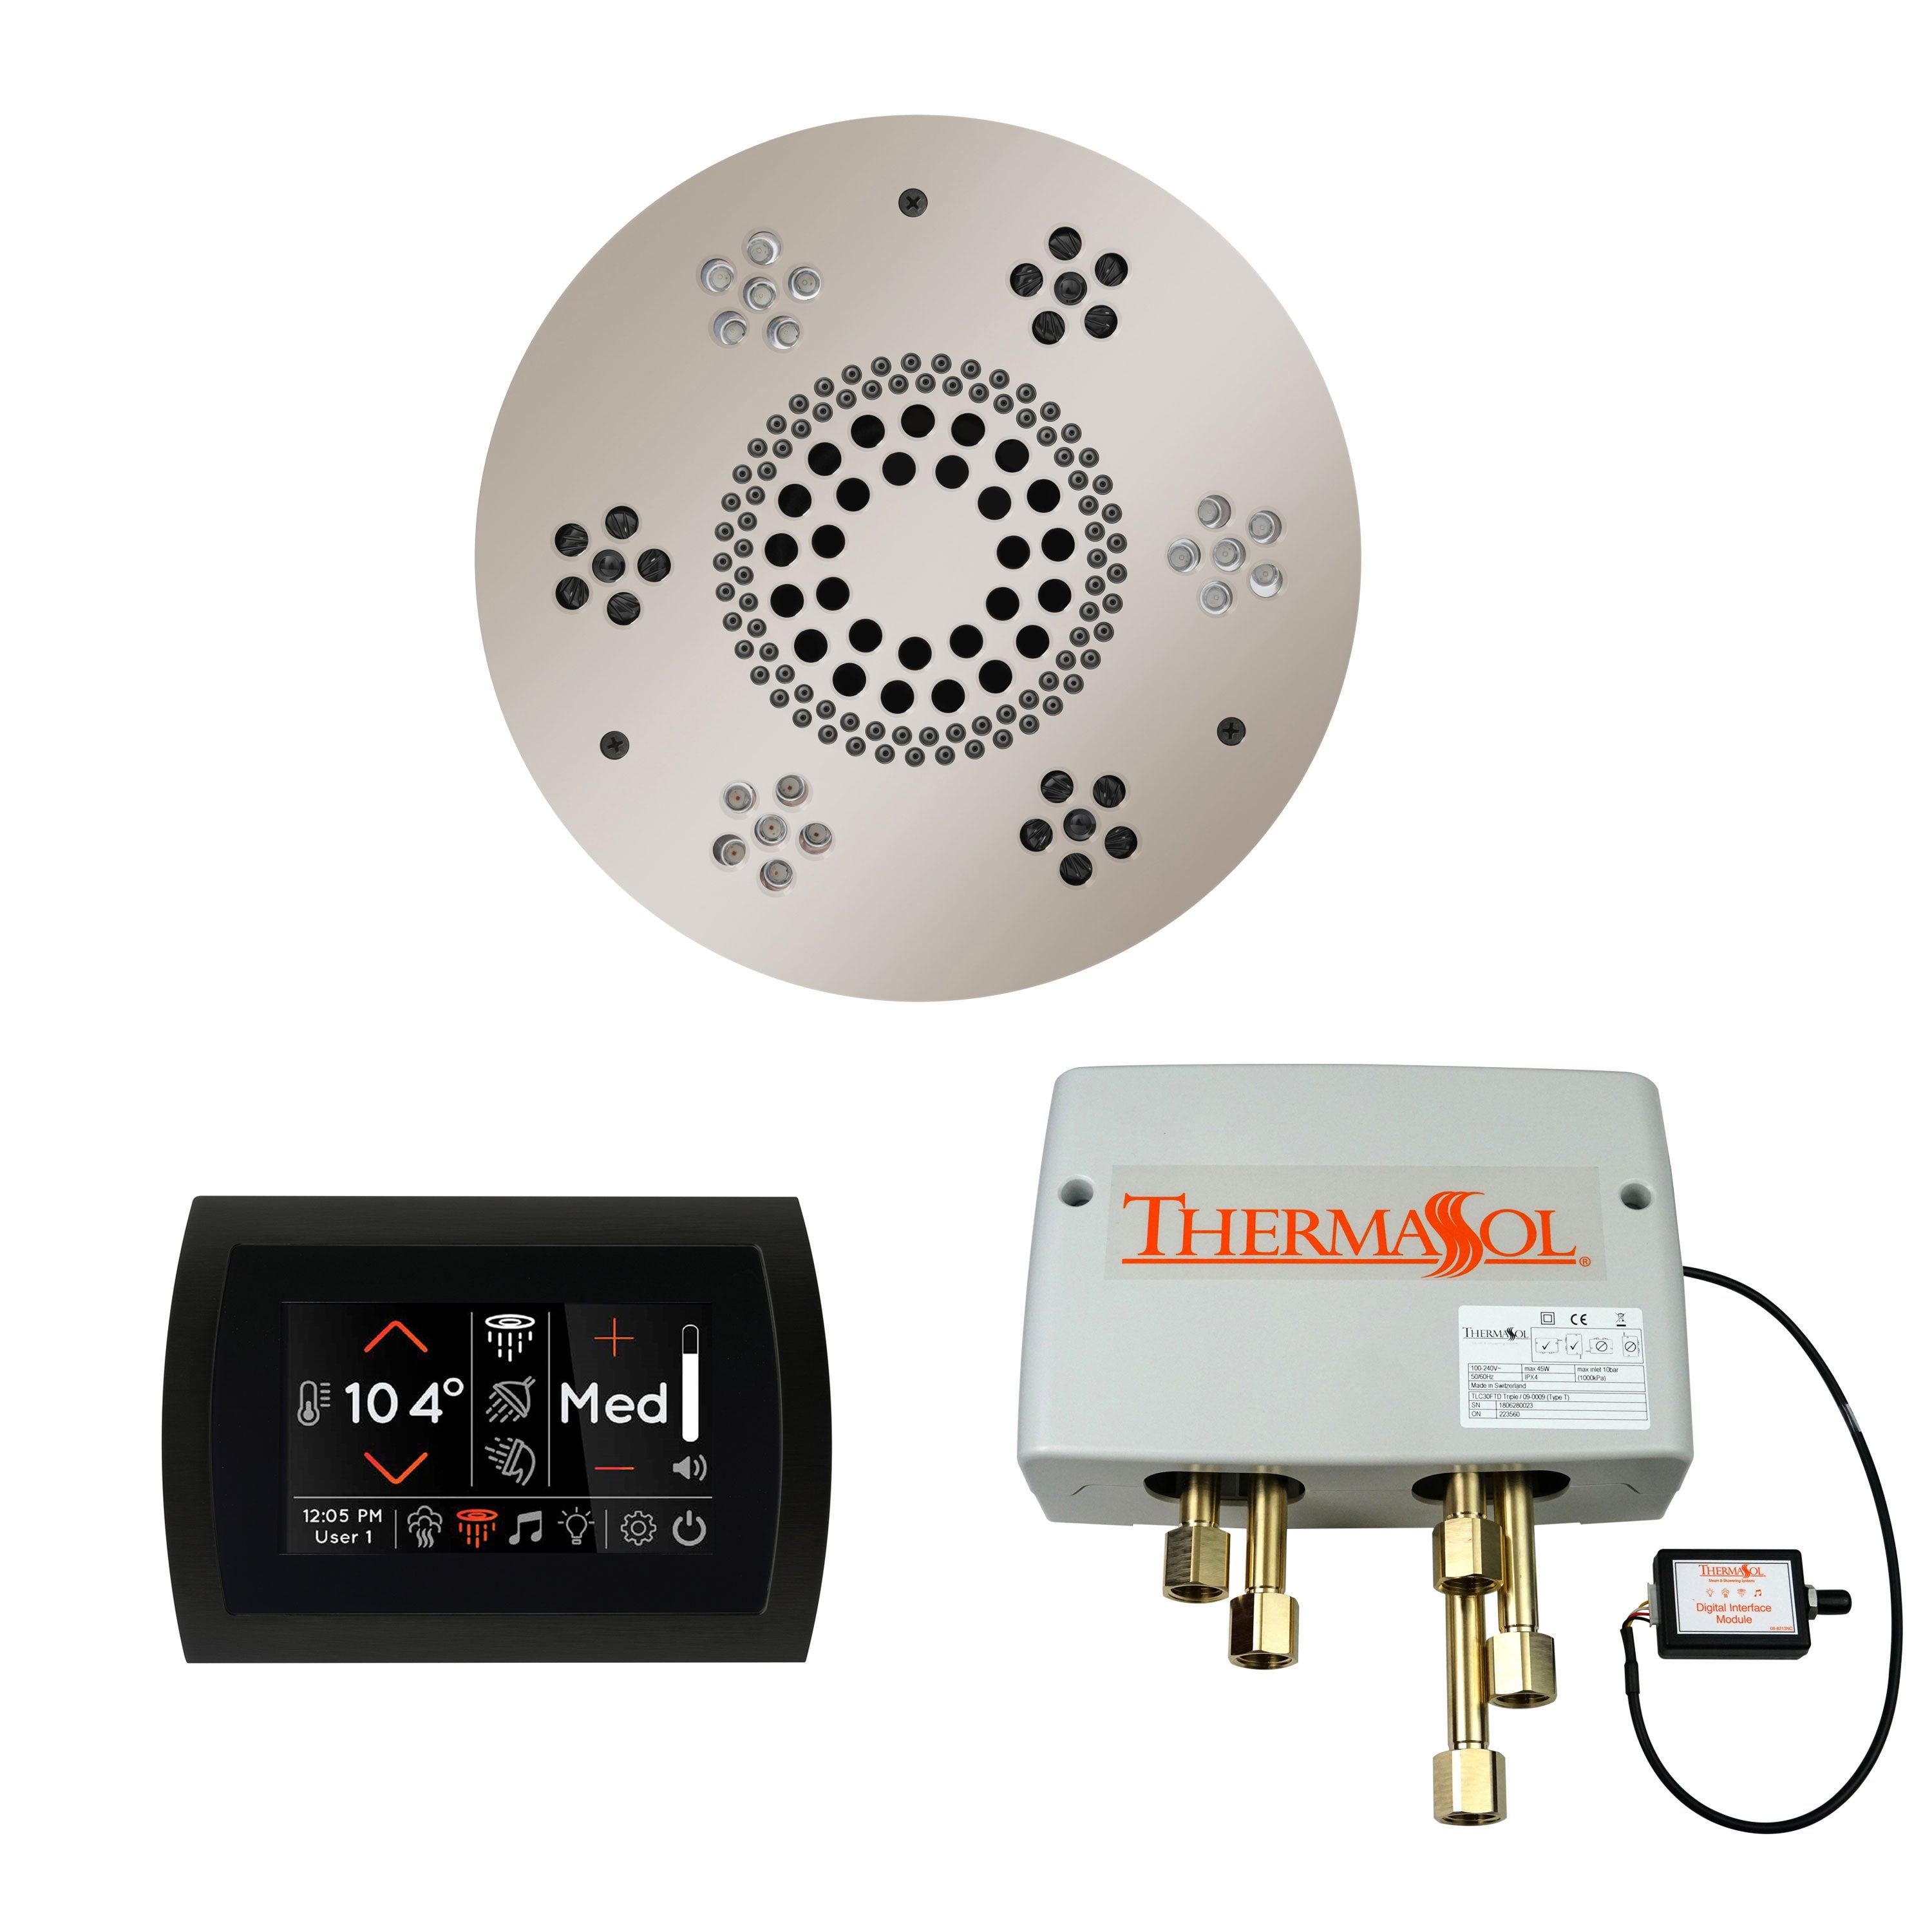 ThermaSol Shower Kit - The Wellness Shower Package with SignaTouch